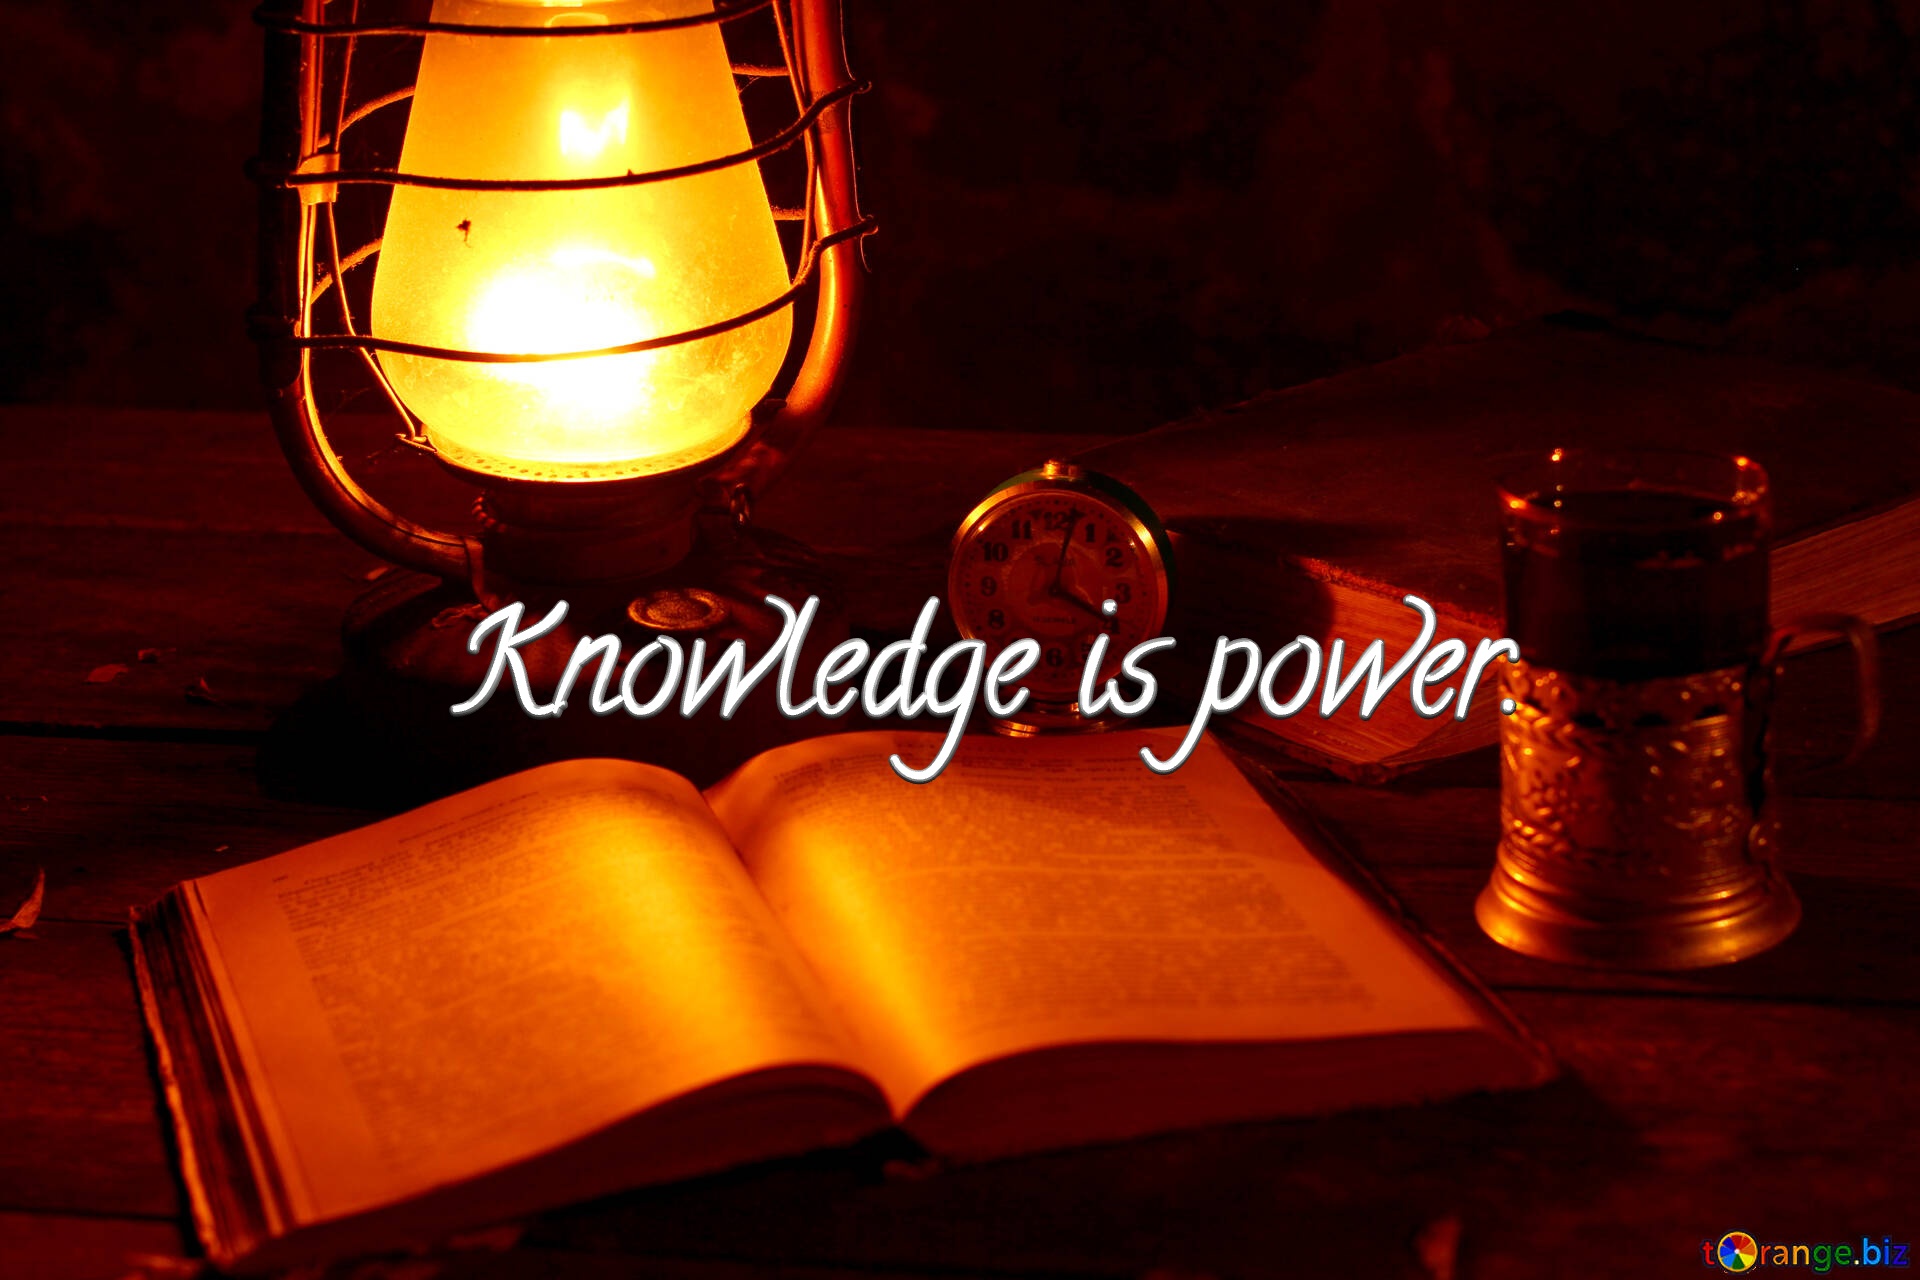 Cover for Facebook   Knowledge is power. Ancient science №33926